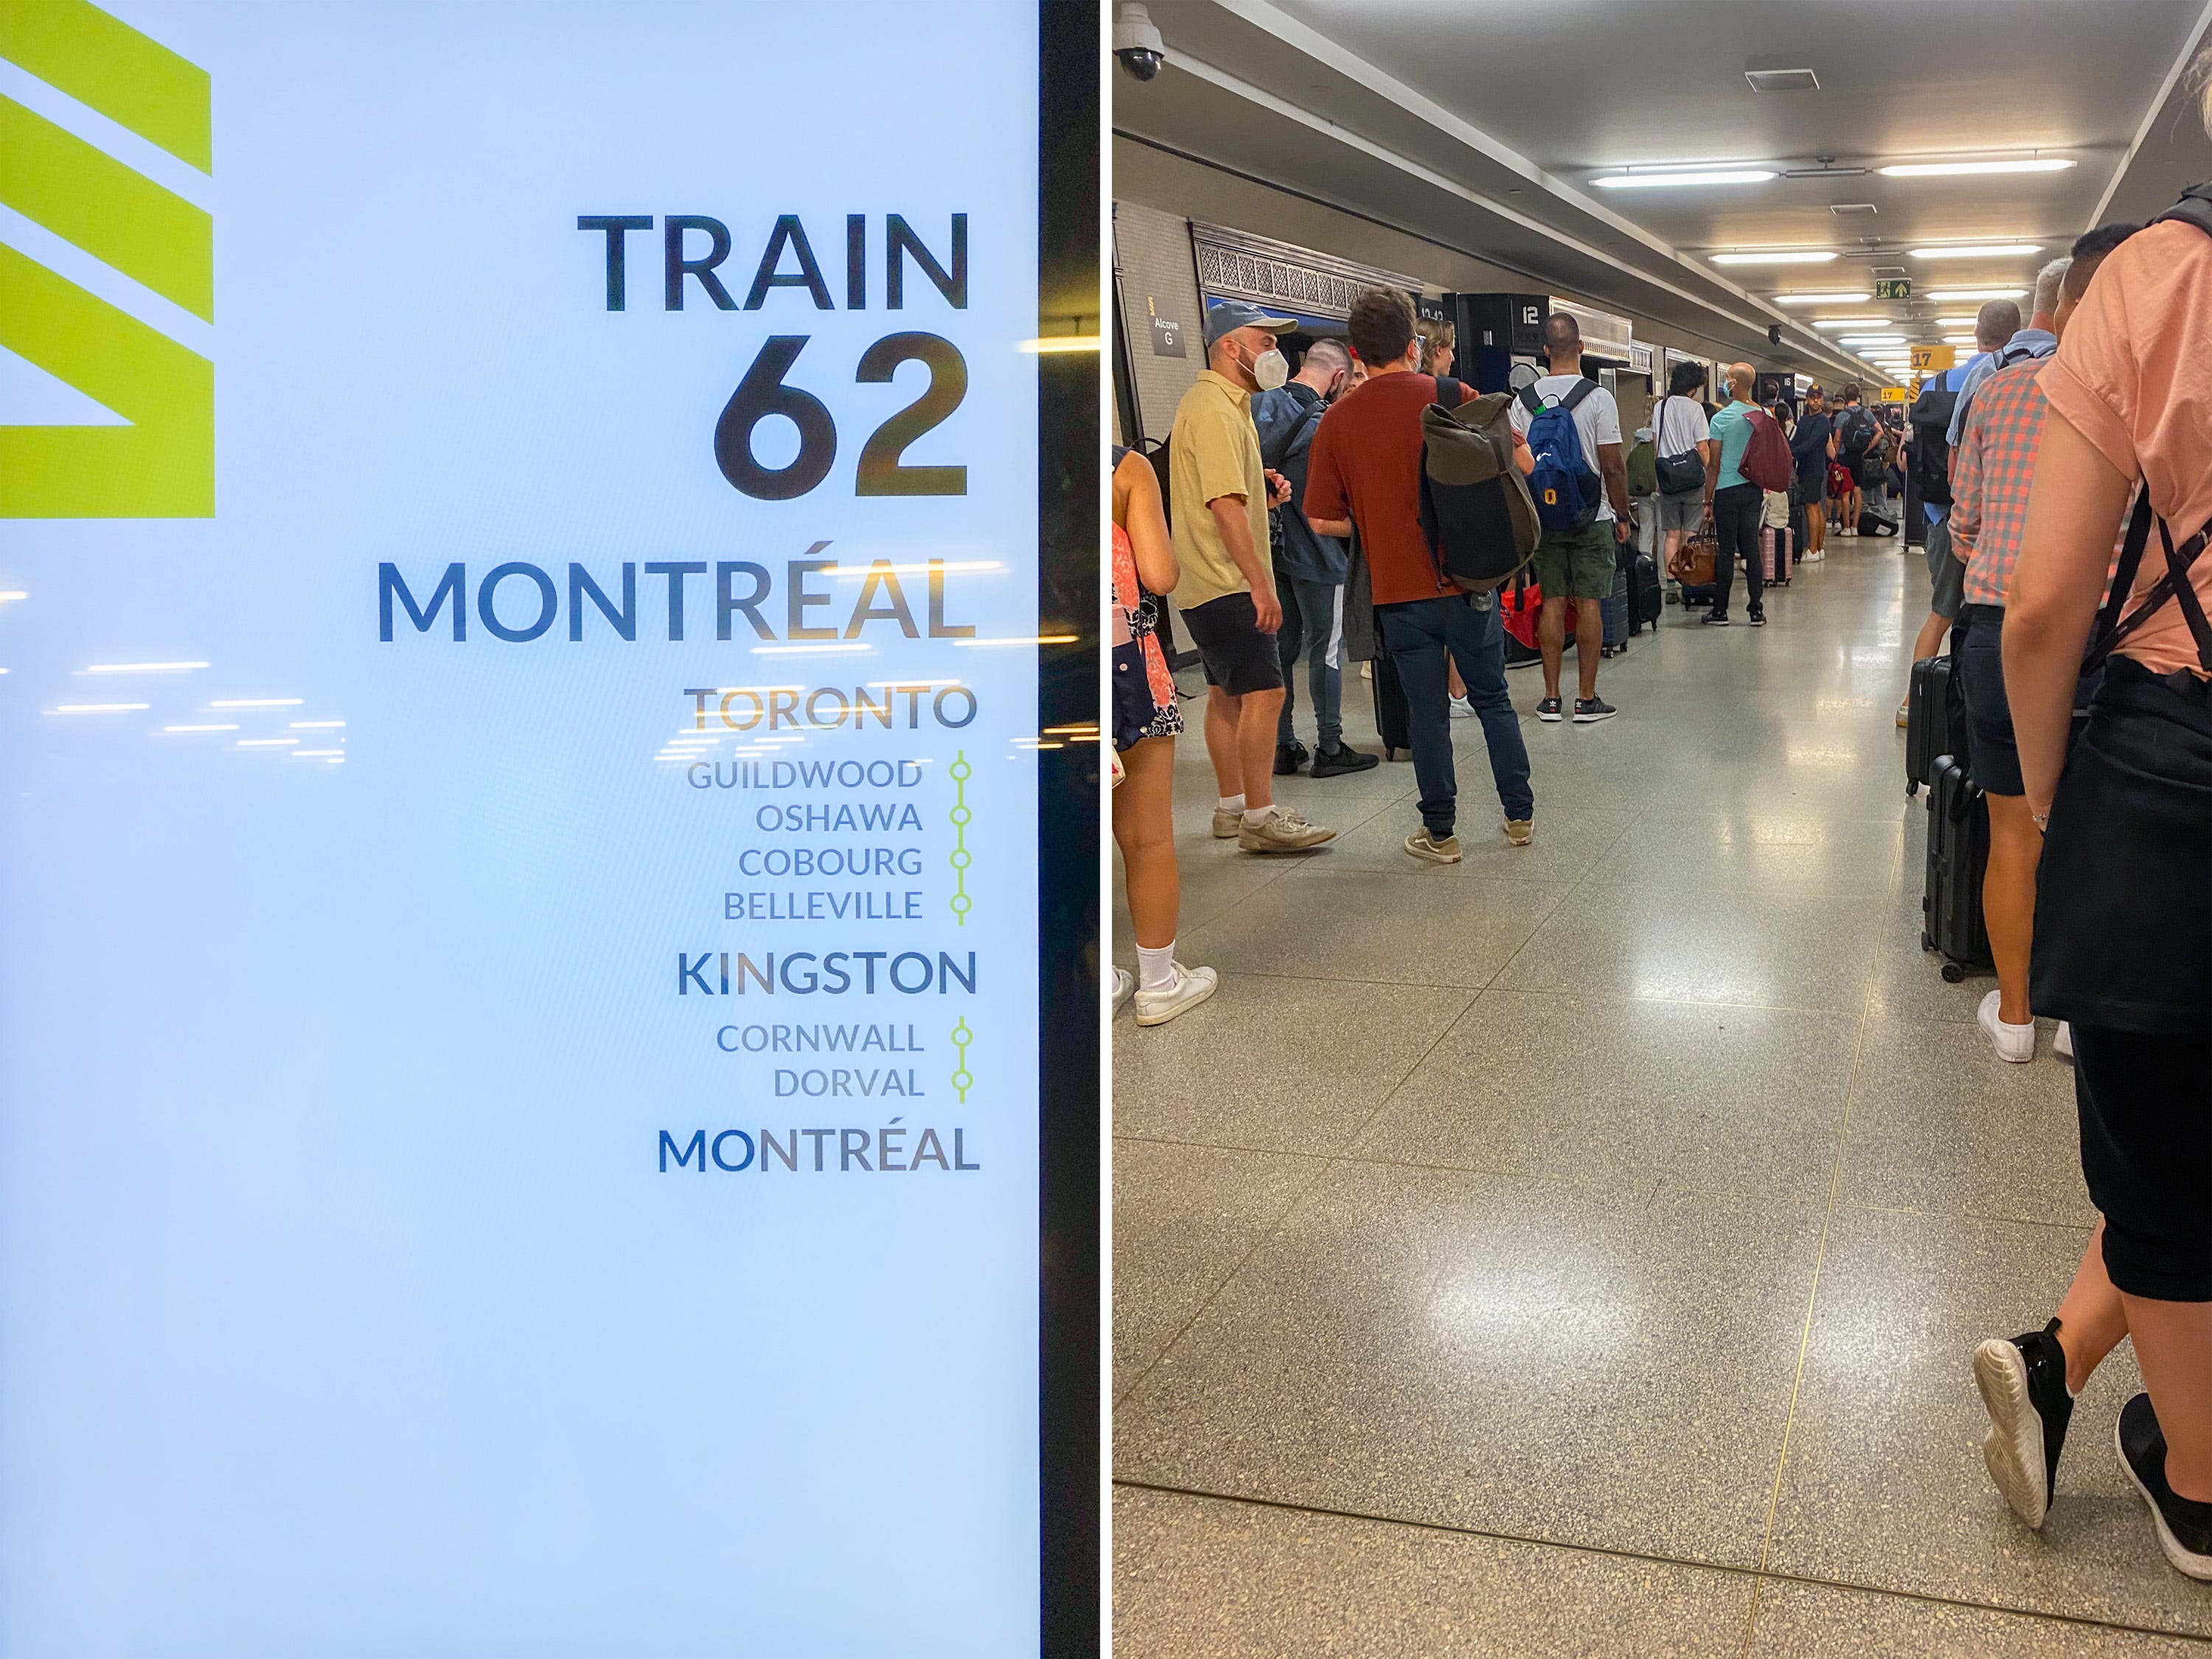 Around 8 a.m., I made my way to the track where my train was boarding. My business-class ticket came with priority boarding, so I was able to skip a long line of passengers.